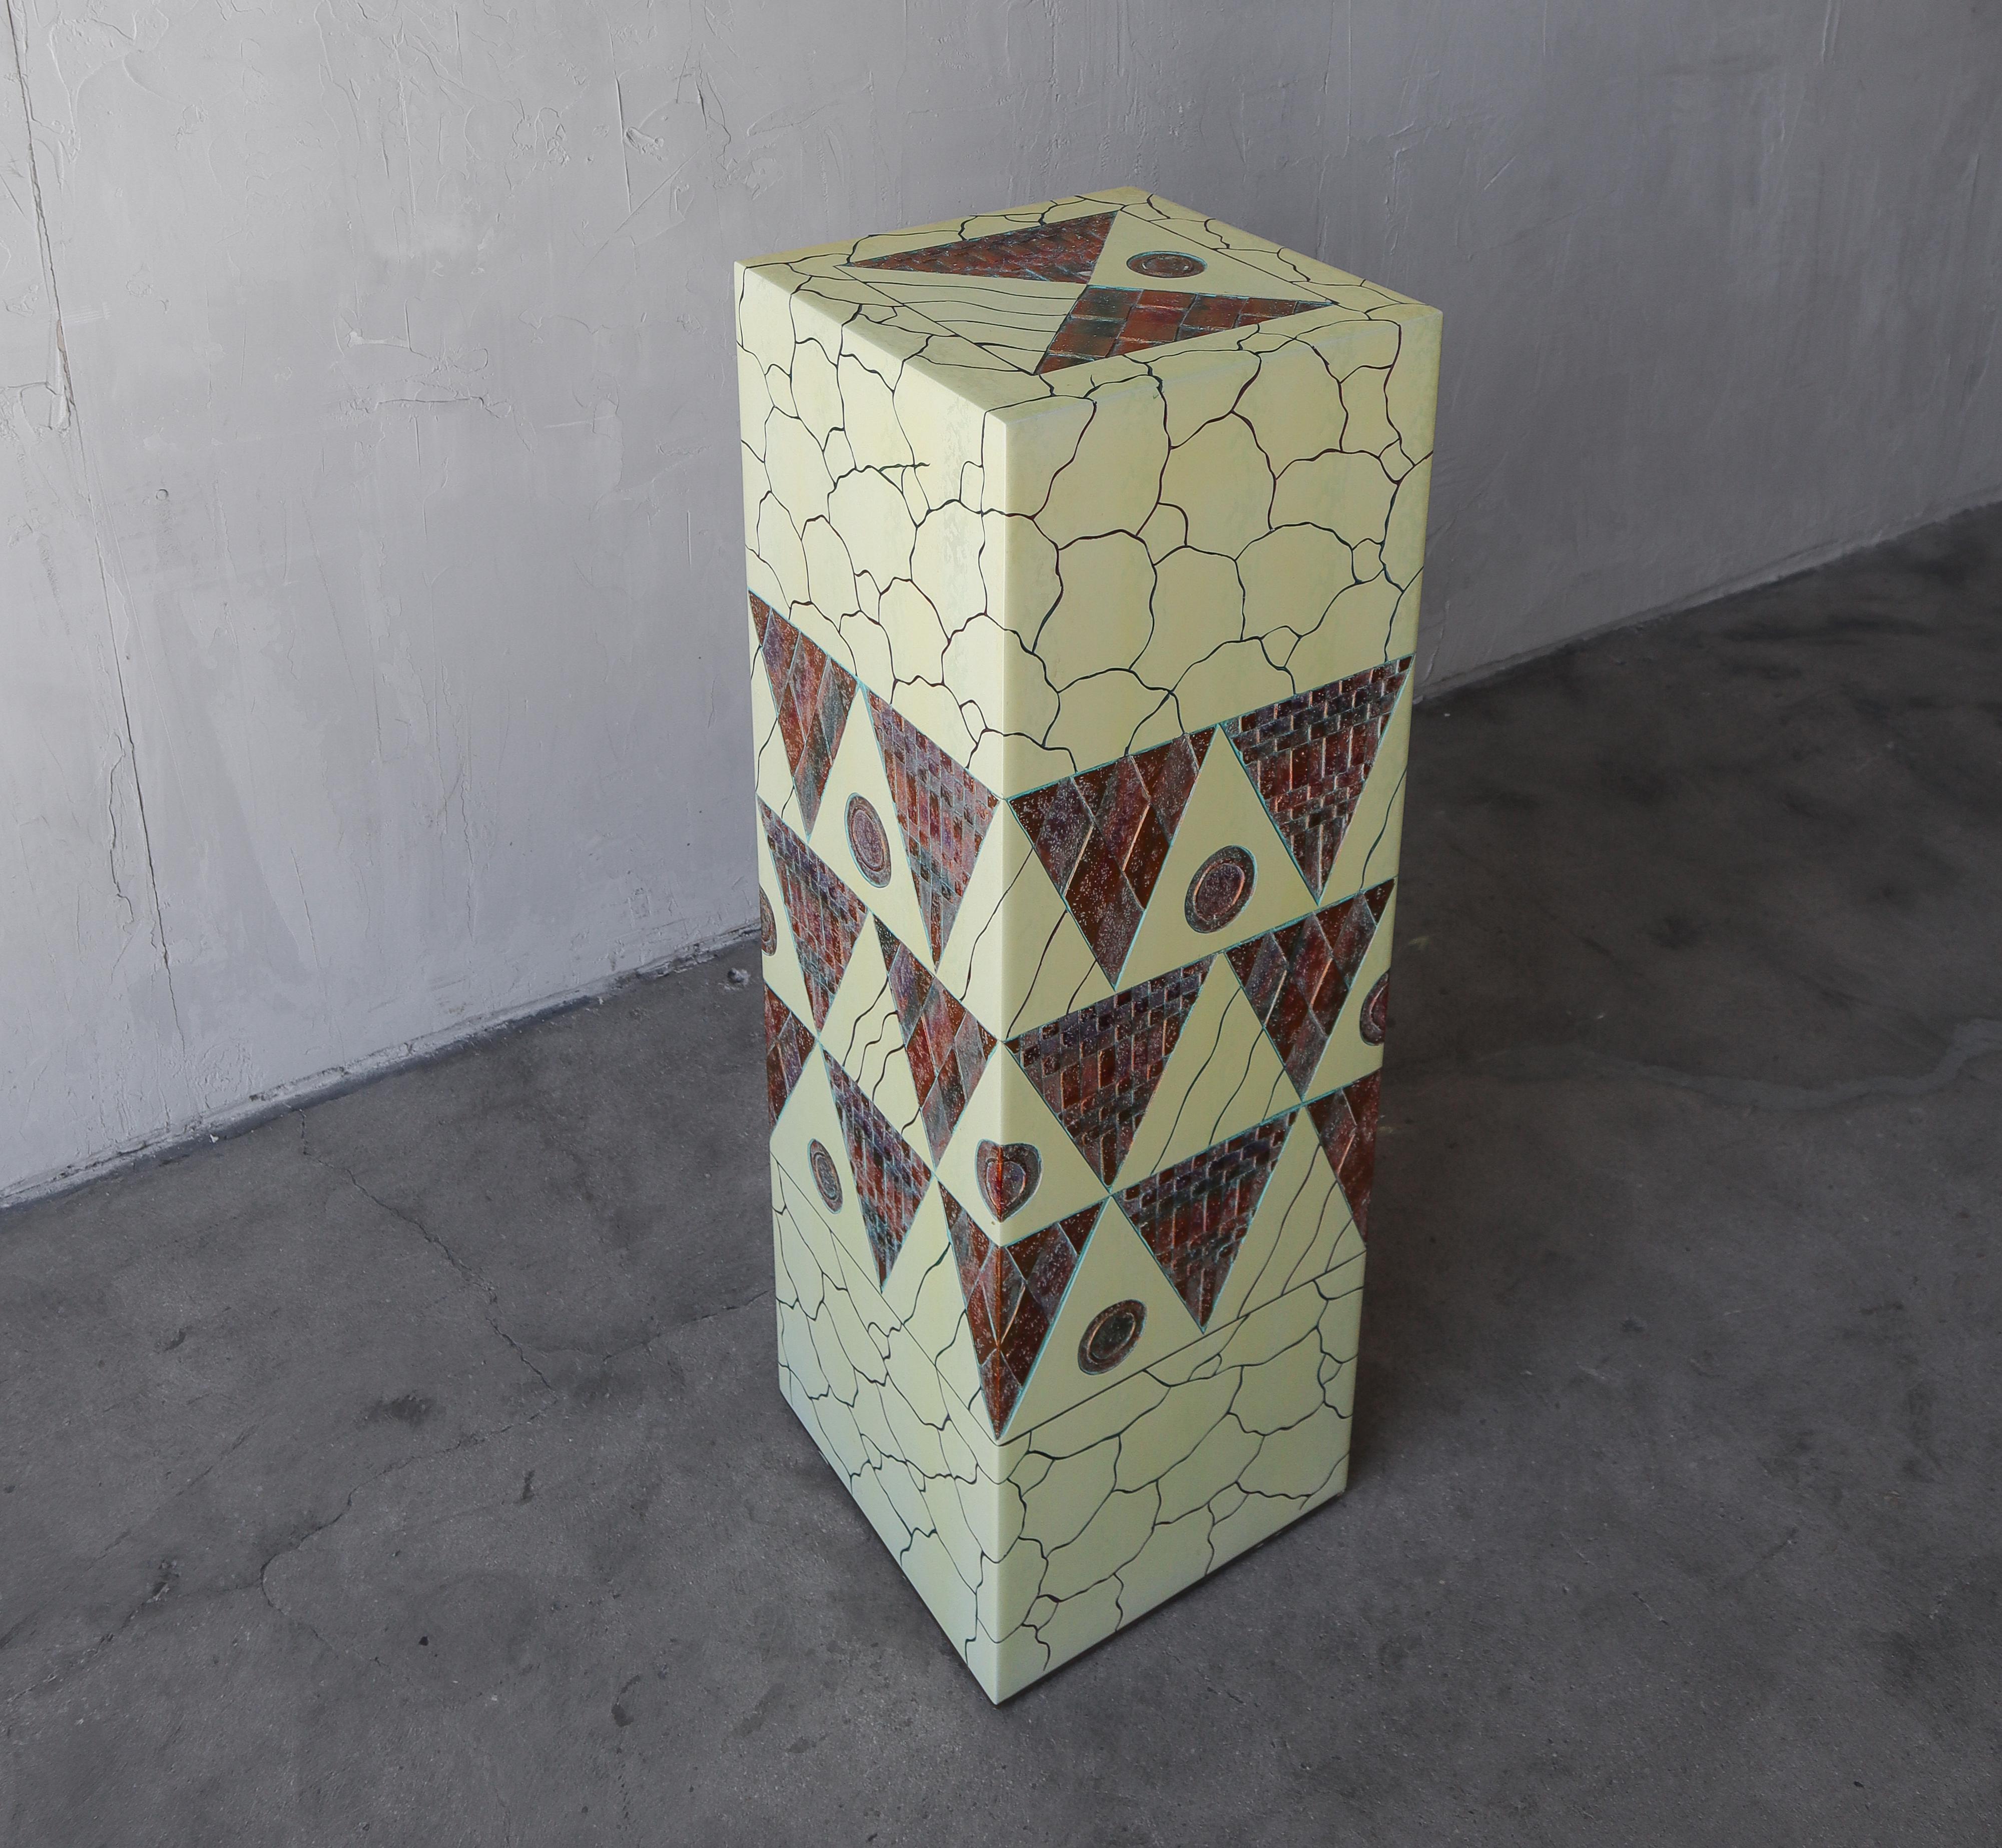 Unique post modern pedestal.  Colorful mixed media piece.  See images for details.  

Minimal loss of the copper foiling along the bottom most edge.  Otherwise in good condition overall.